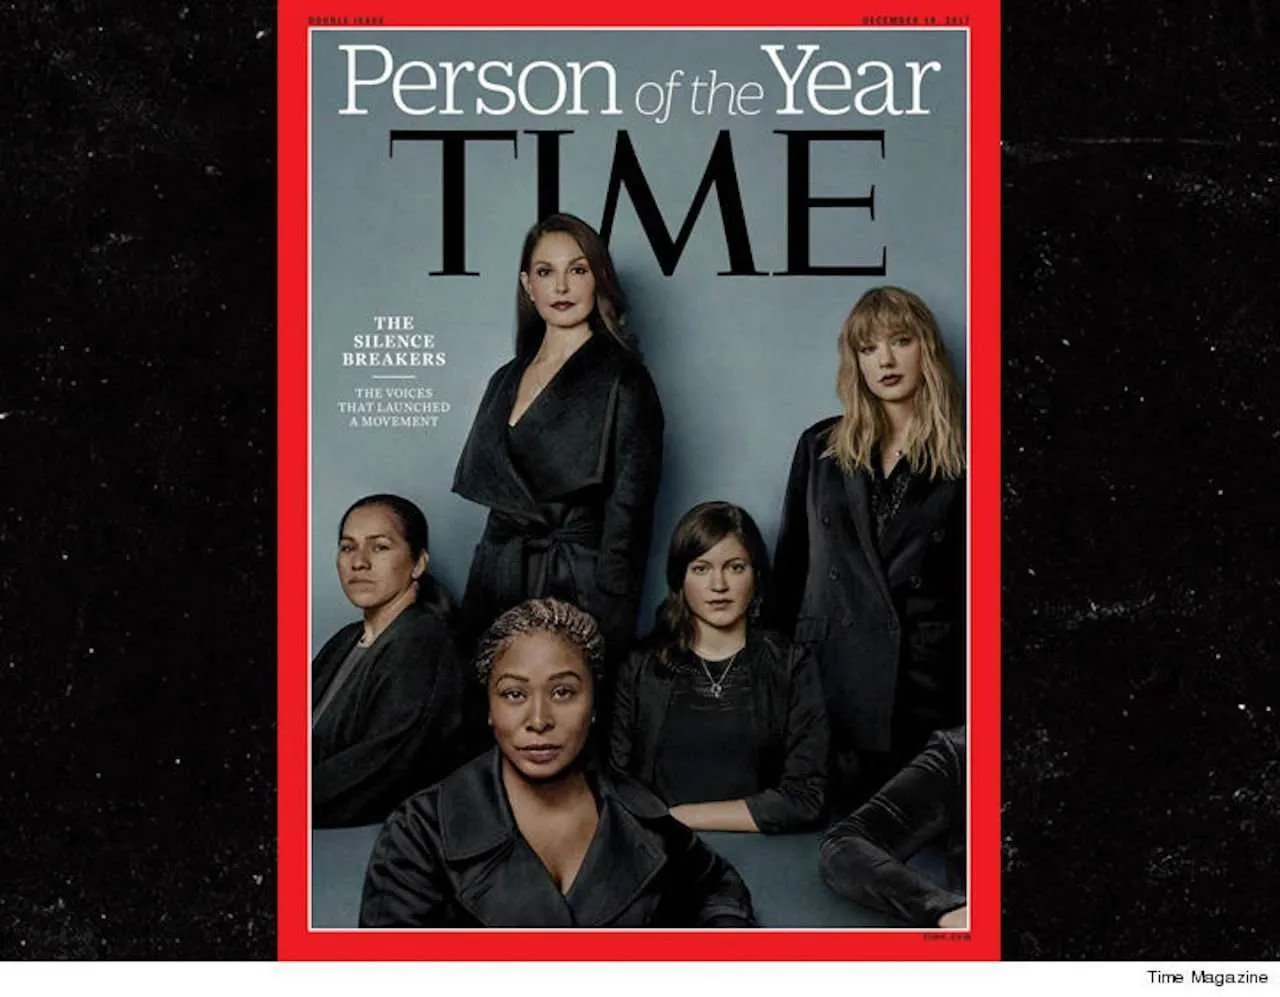 The silence breakers person of the year time magazine